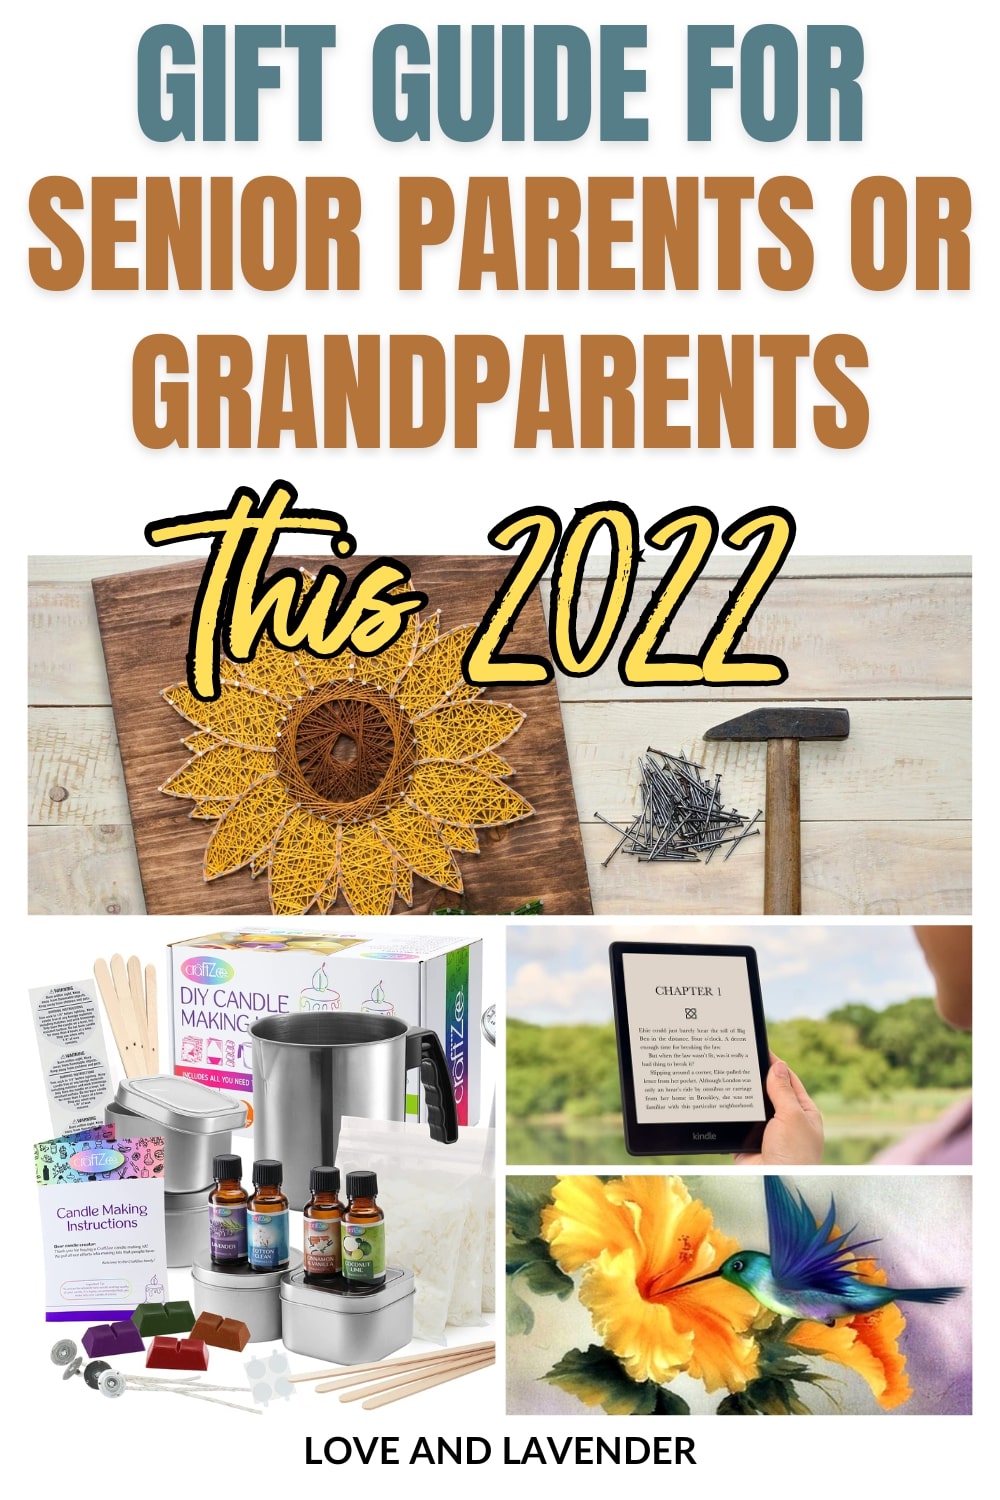 ﻿﻿Trying to think of gift ideas for your older parents or grandparents that will keep them entertained during these long stretches at home? Check out this guide for some great ideas!